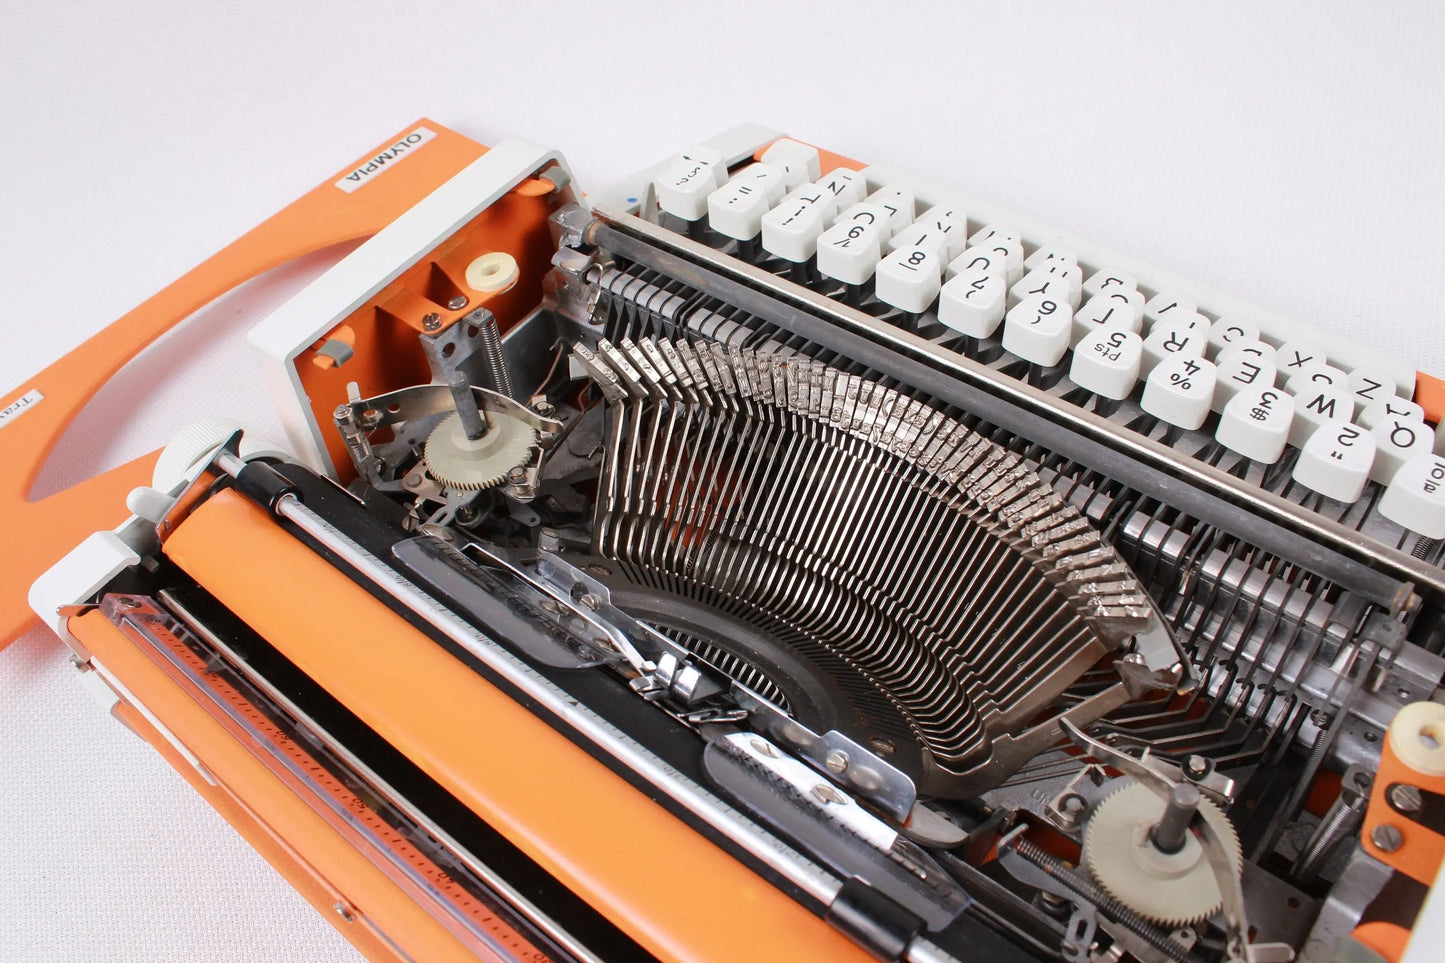 Olympia Traveller De Luxe Orange Typewriter, Vintage, Manual Portable, Professionally Serviced by Typewriter.Company - ElGranero Typewriter.Company